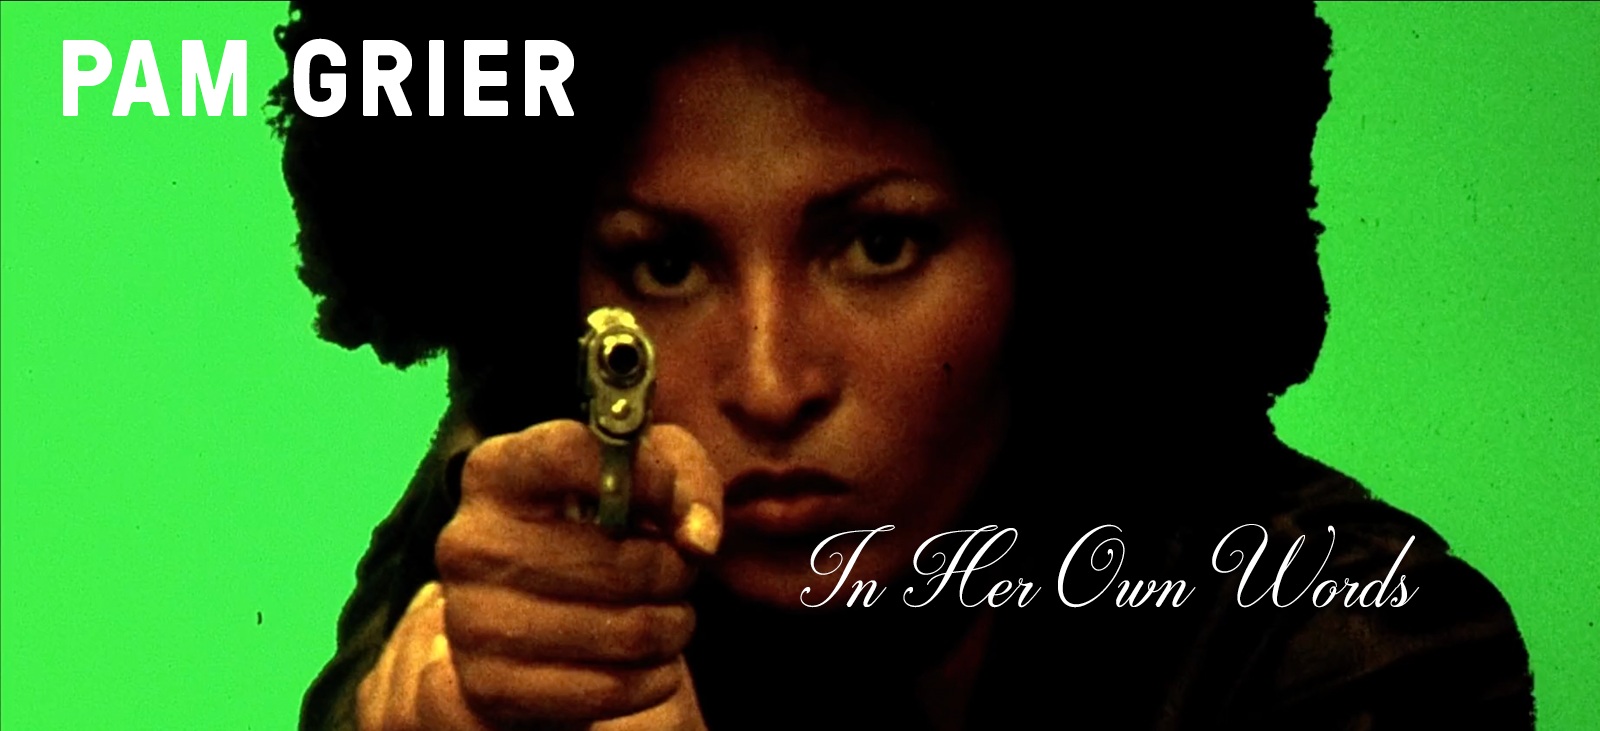 pamgrier1